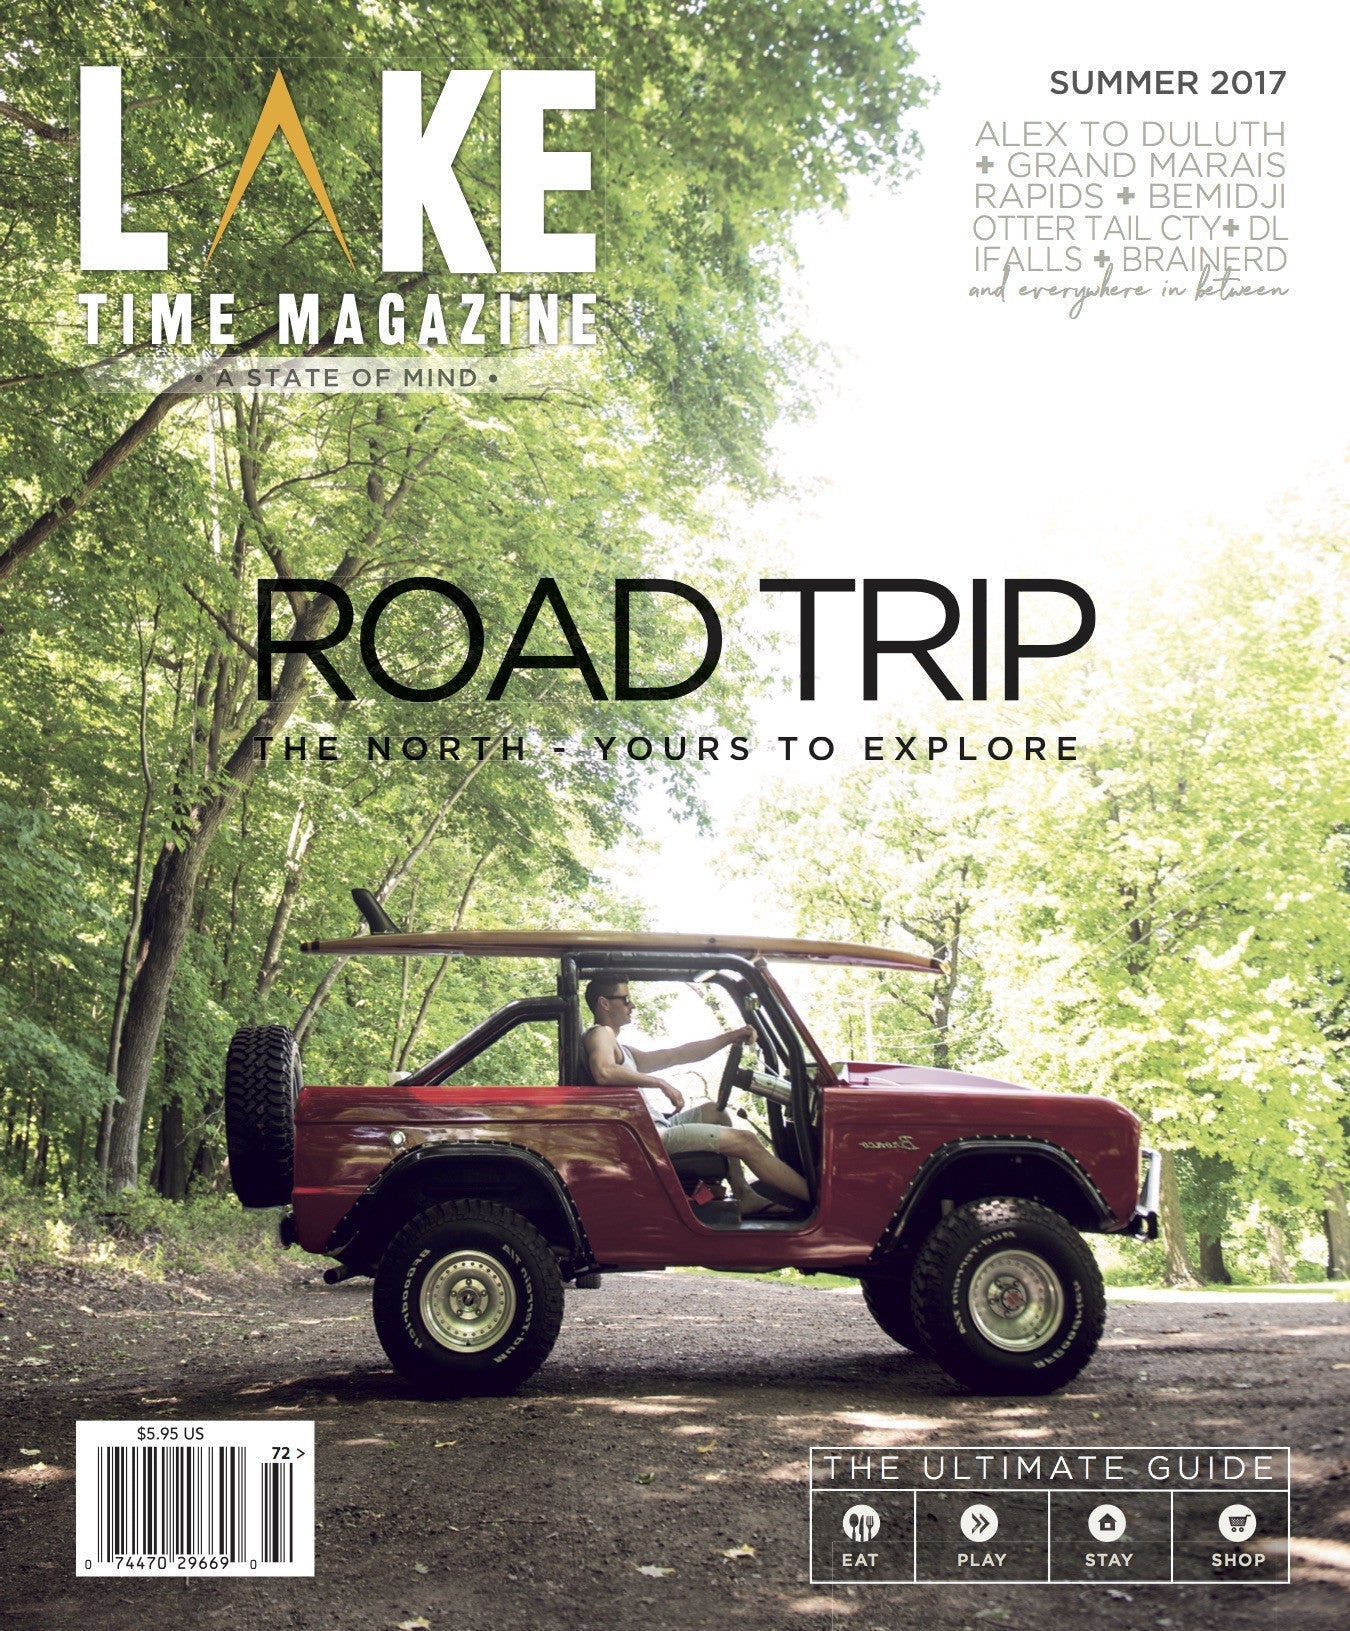 Lake Time Magazine: Issue 8 - The Lake and Company